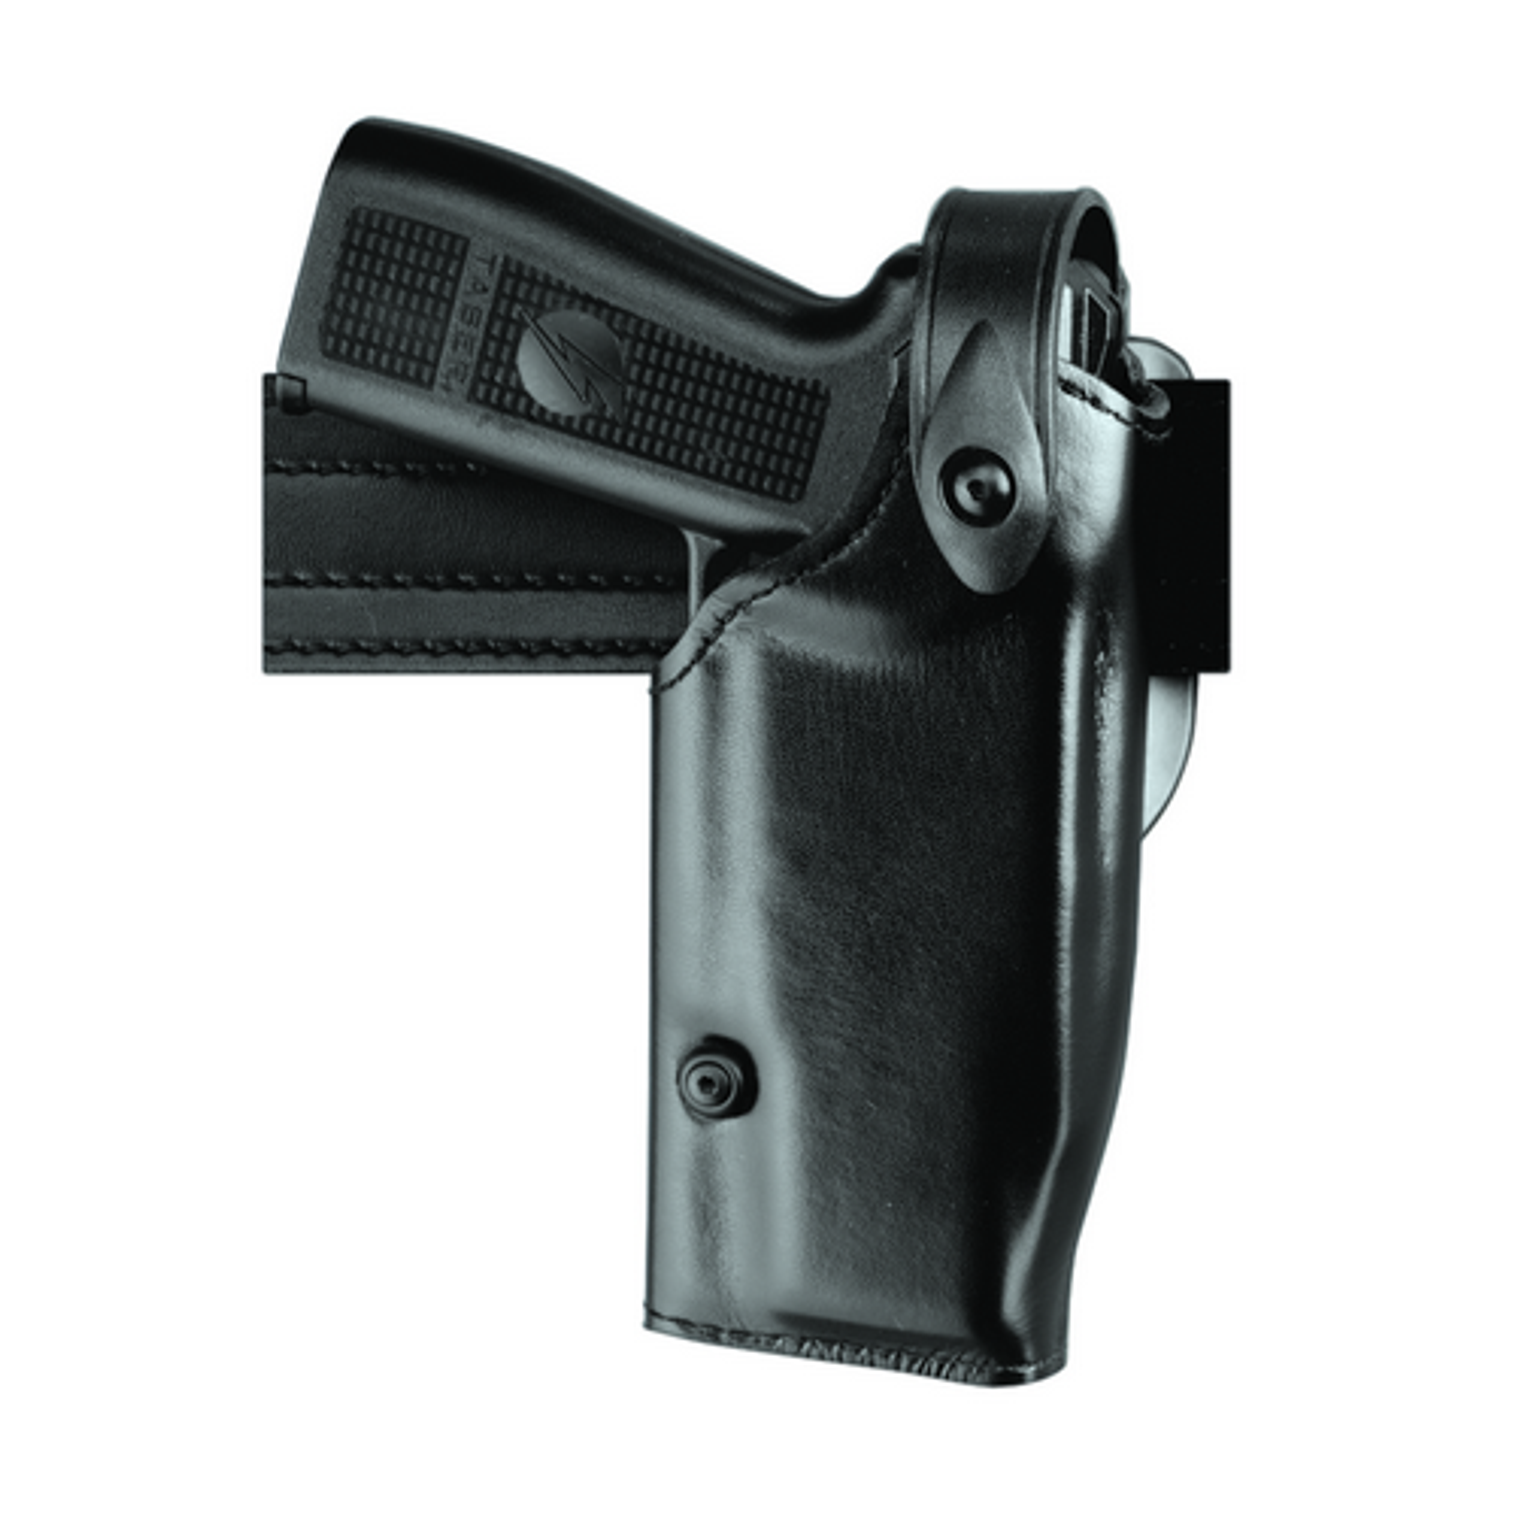 Model 6280 Sls Mid-ride Level Ii Retention Duty Holster For Smith & Wesson M&p 9 - KR6280-219-81